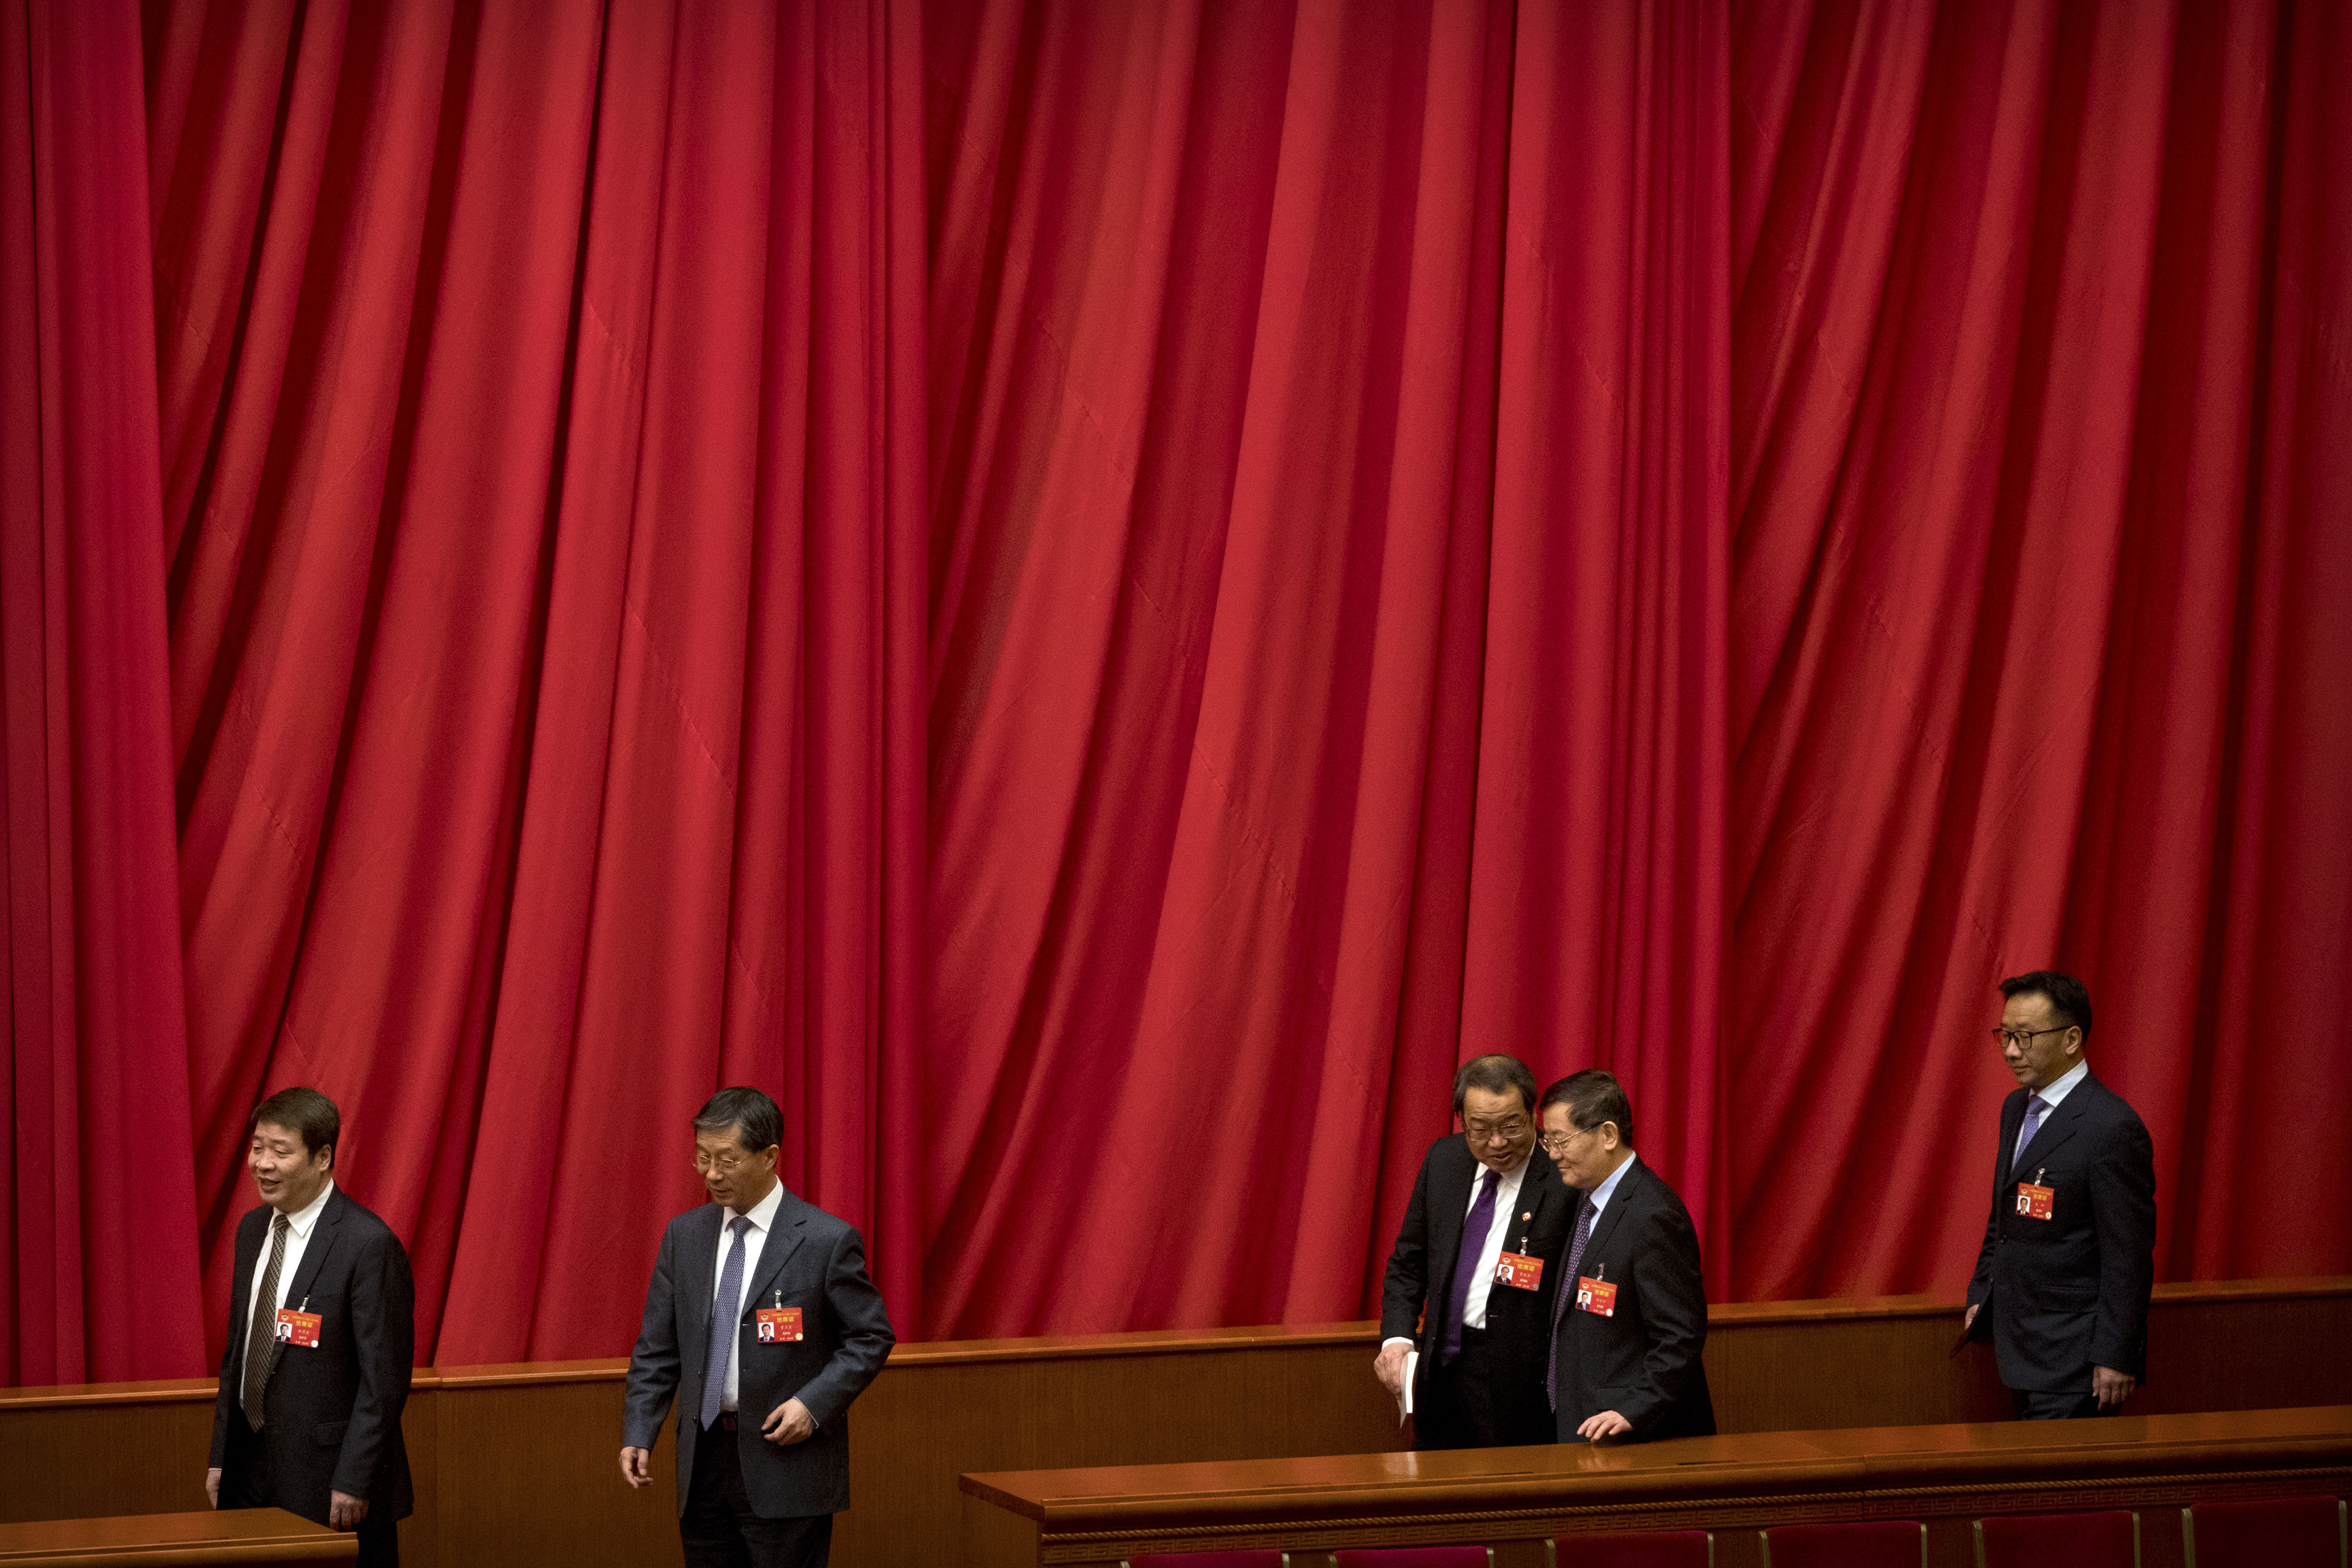 Delegates arrive for the closing session of the Chinese People's Political Consultative Conference (CPPCC) at the Great Hall of the People in Beijing, Wednesday, March 13, 2019. (AP Photo/Mark Schiefelbein)